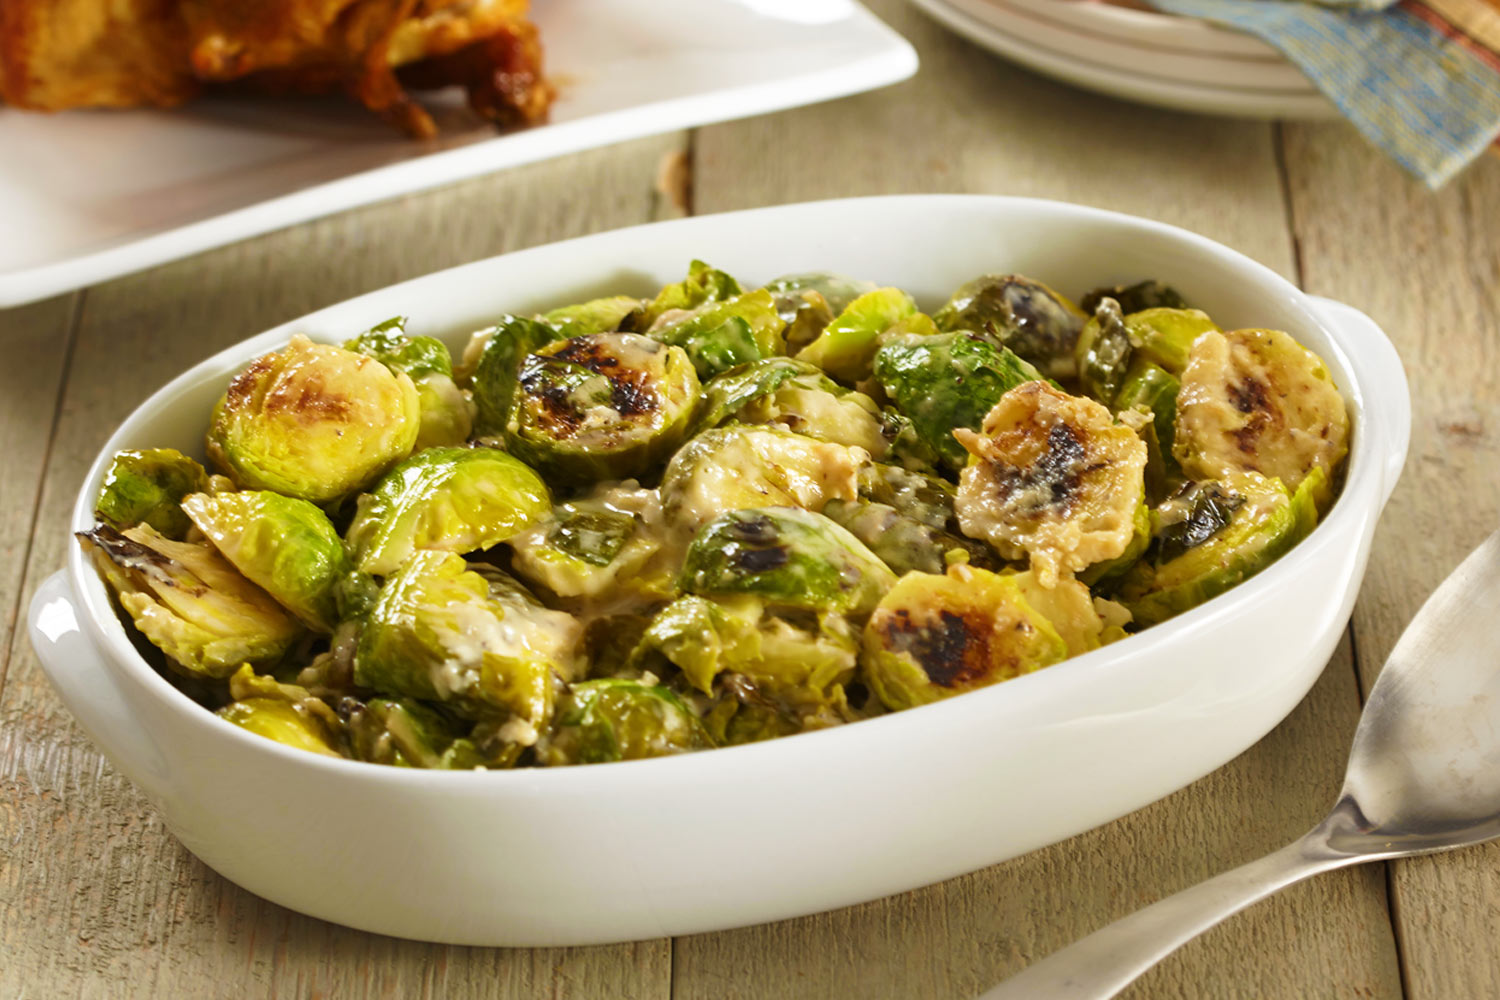 Creamy Garlic-Parmesan Brussels Sprouts